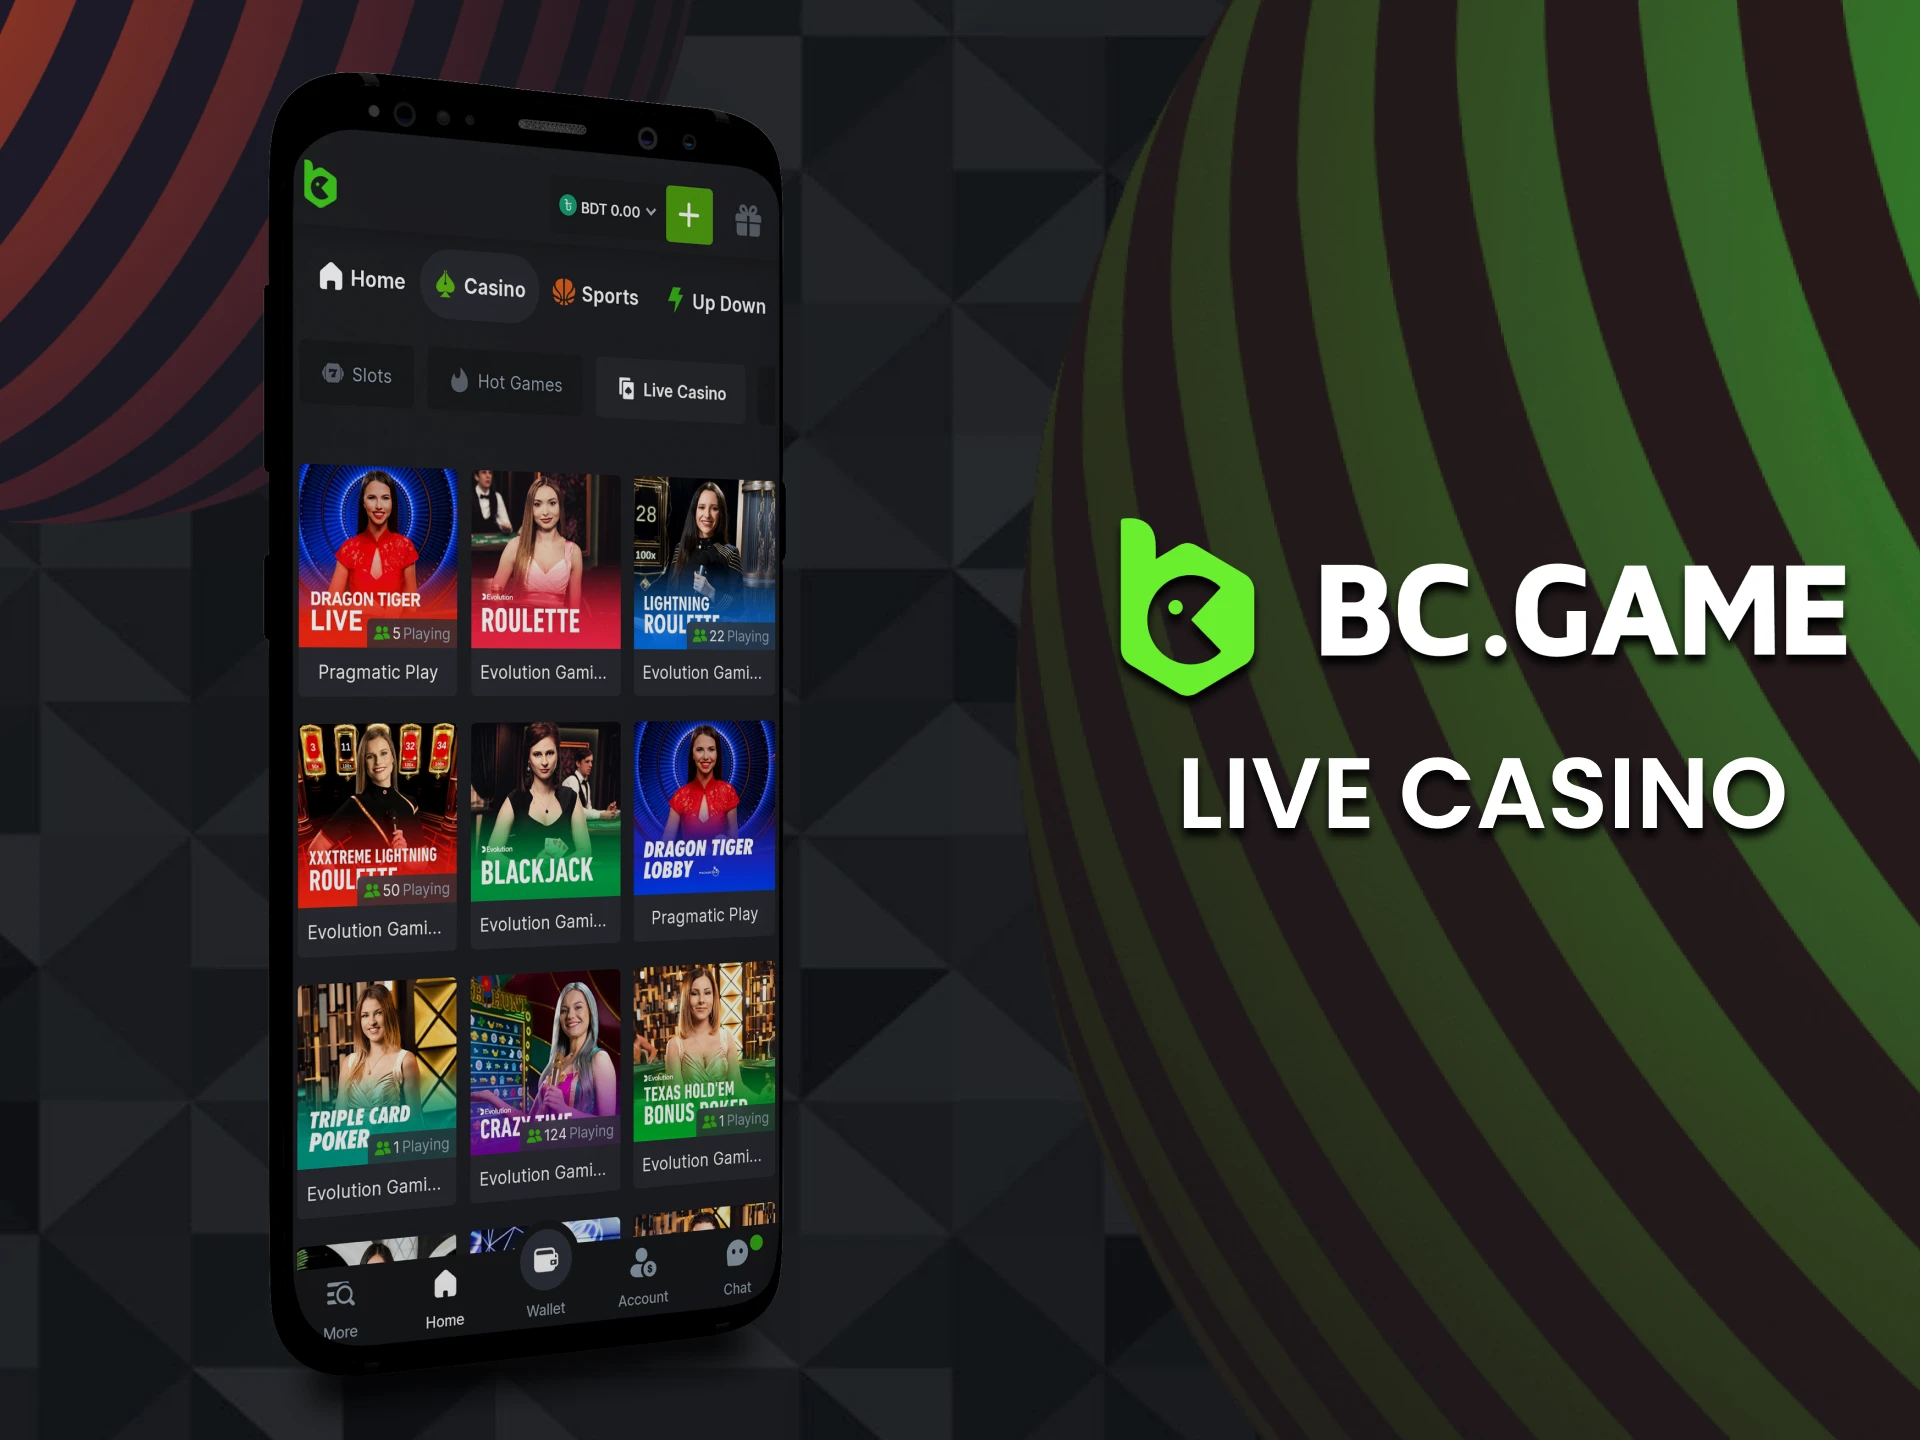 Play your favourite live casino games with real dealers in the BC Game app.